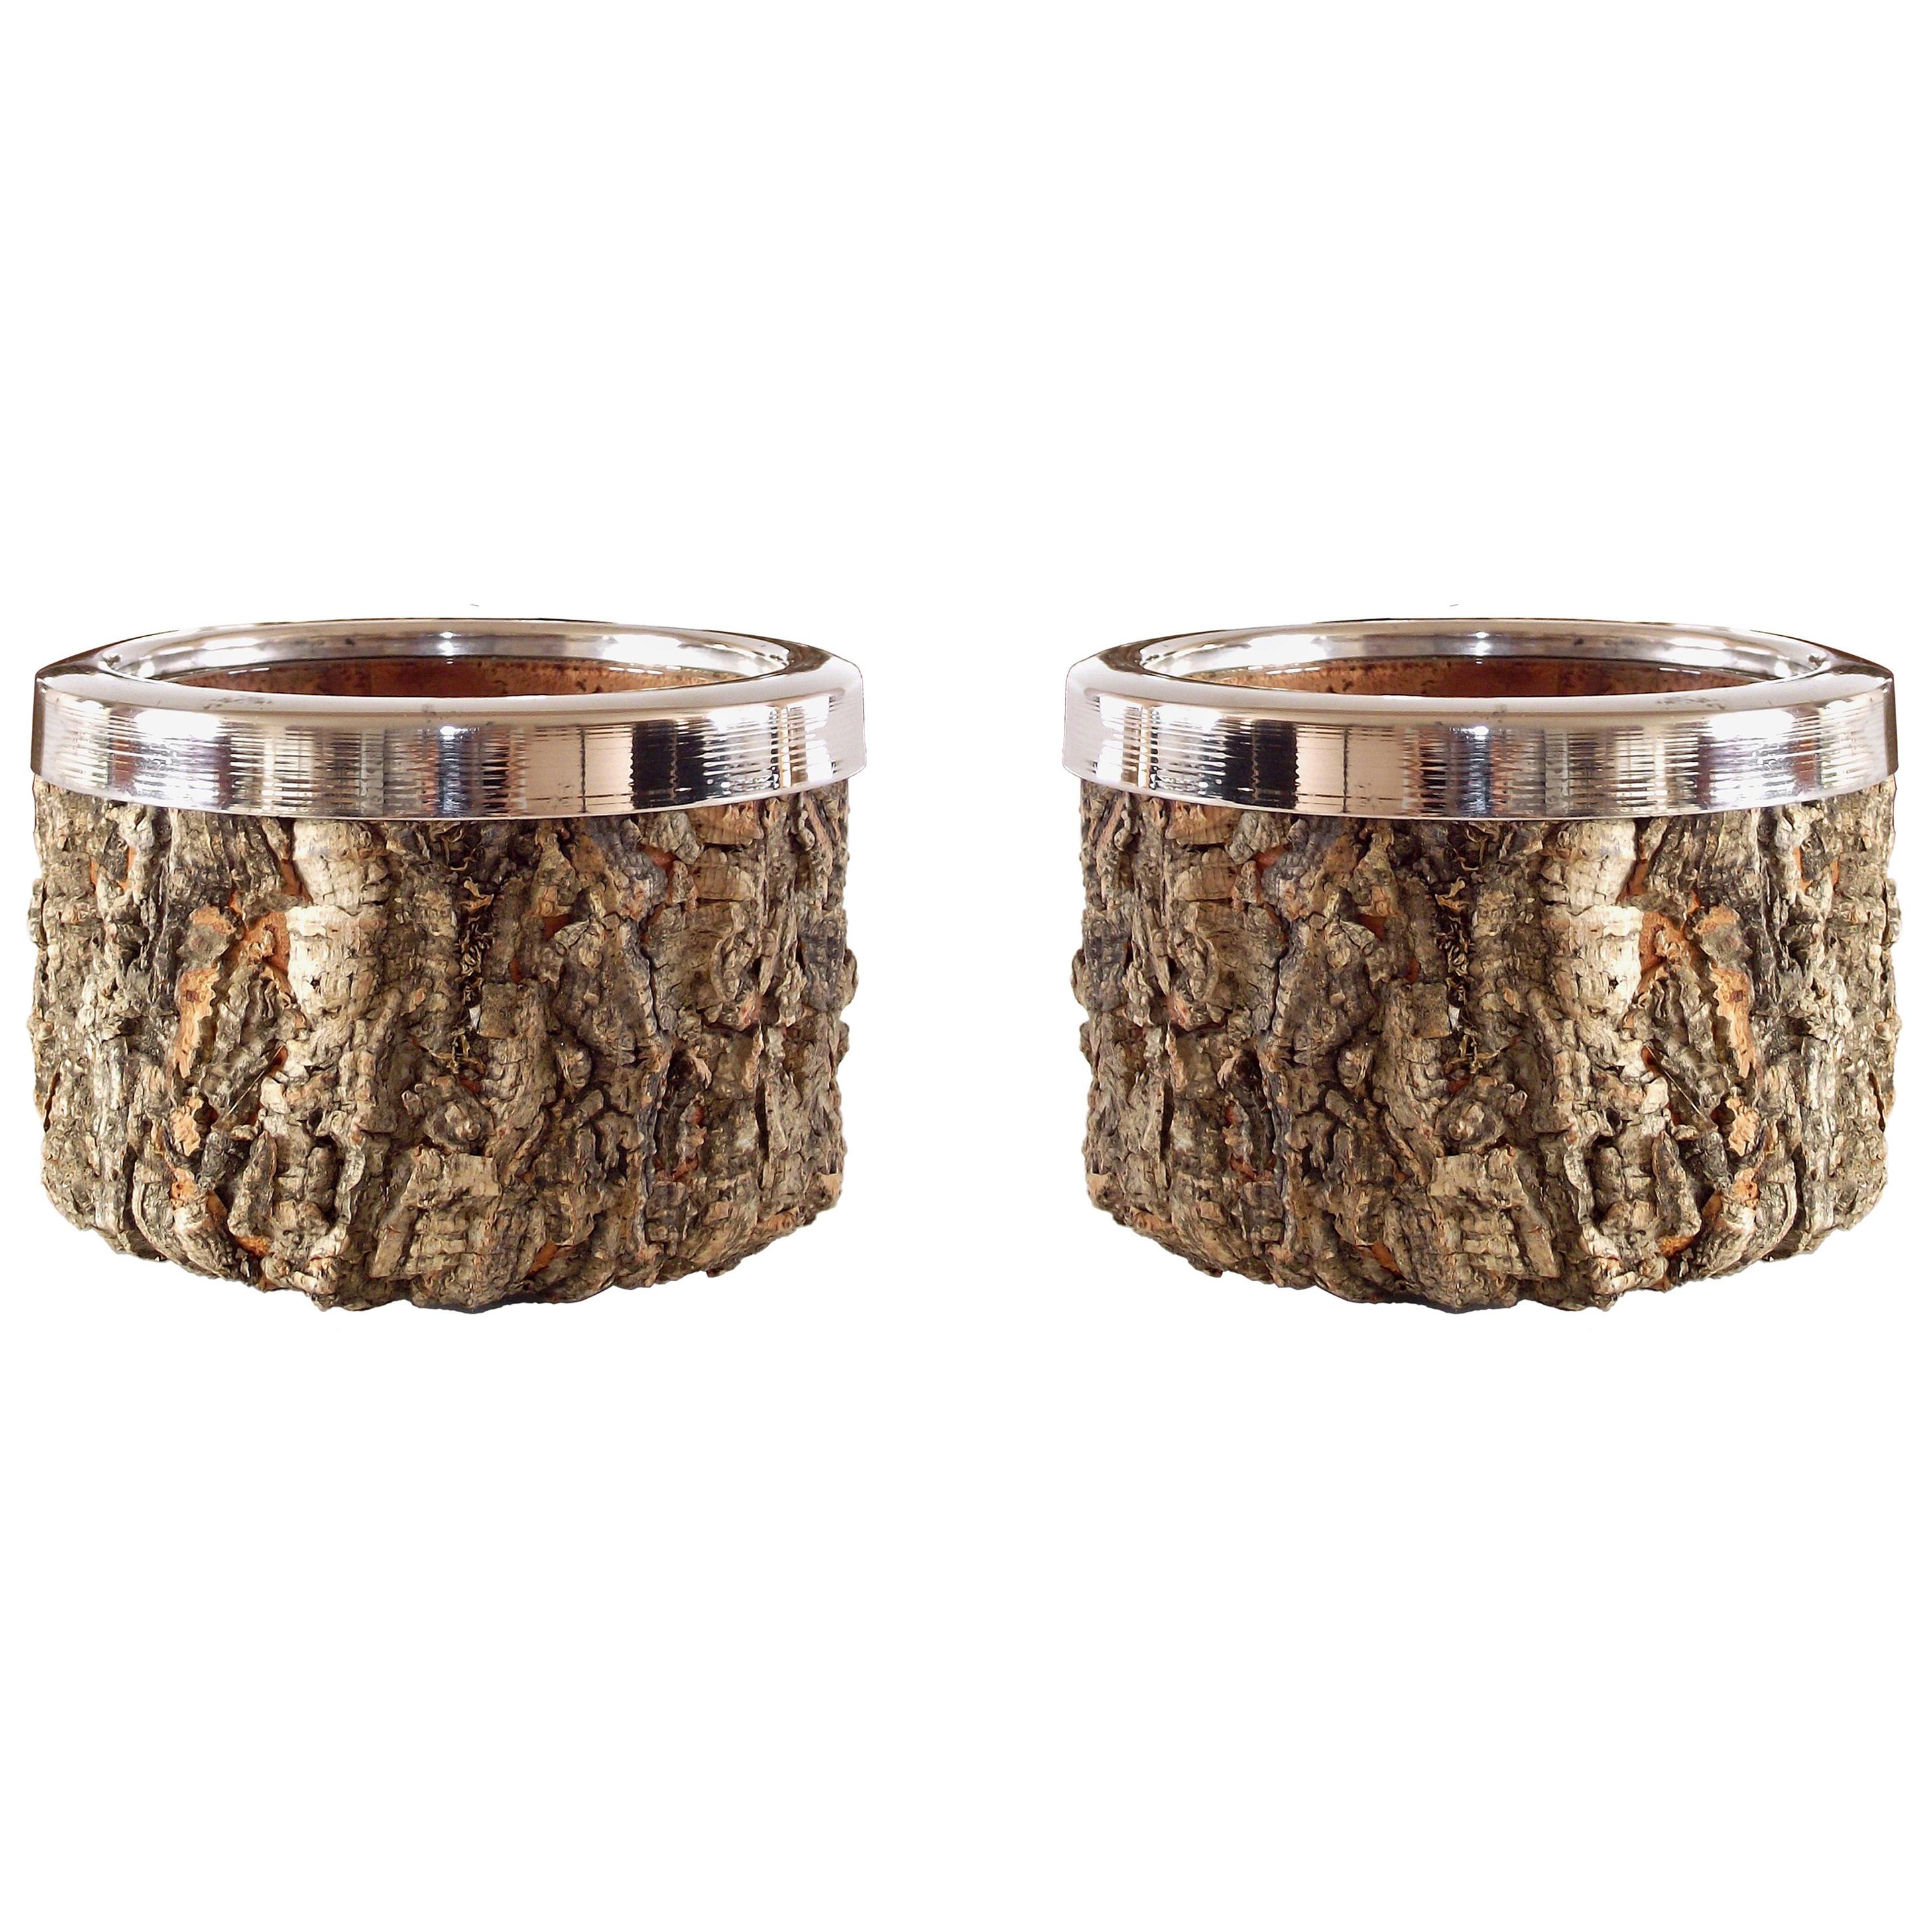 Gabriella Crespi Pair of Cork and Chrome Bowls with Glass Inserts, 1970s